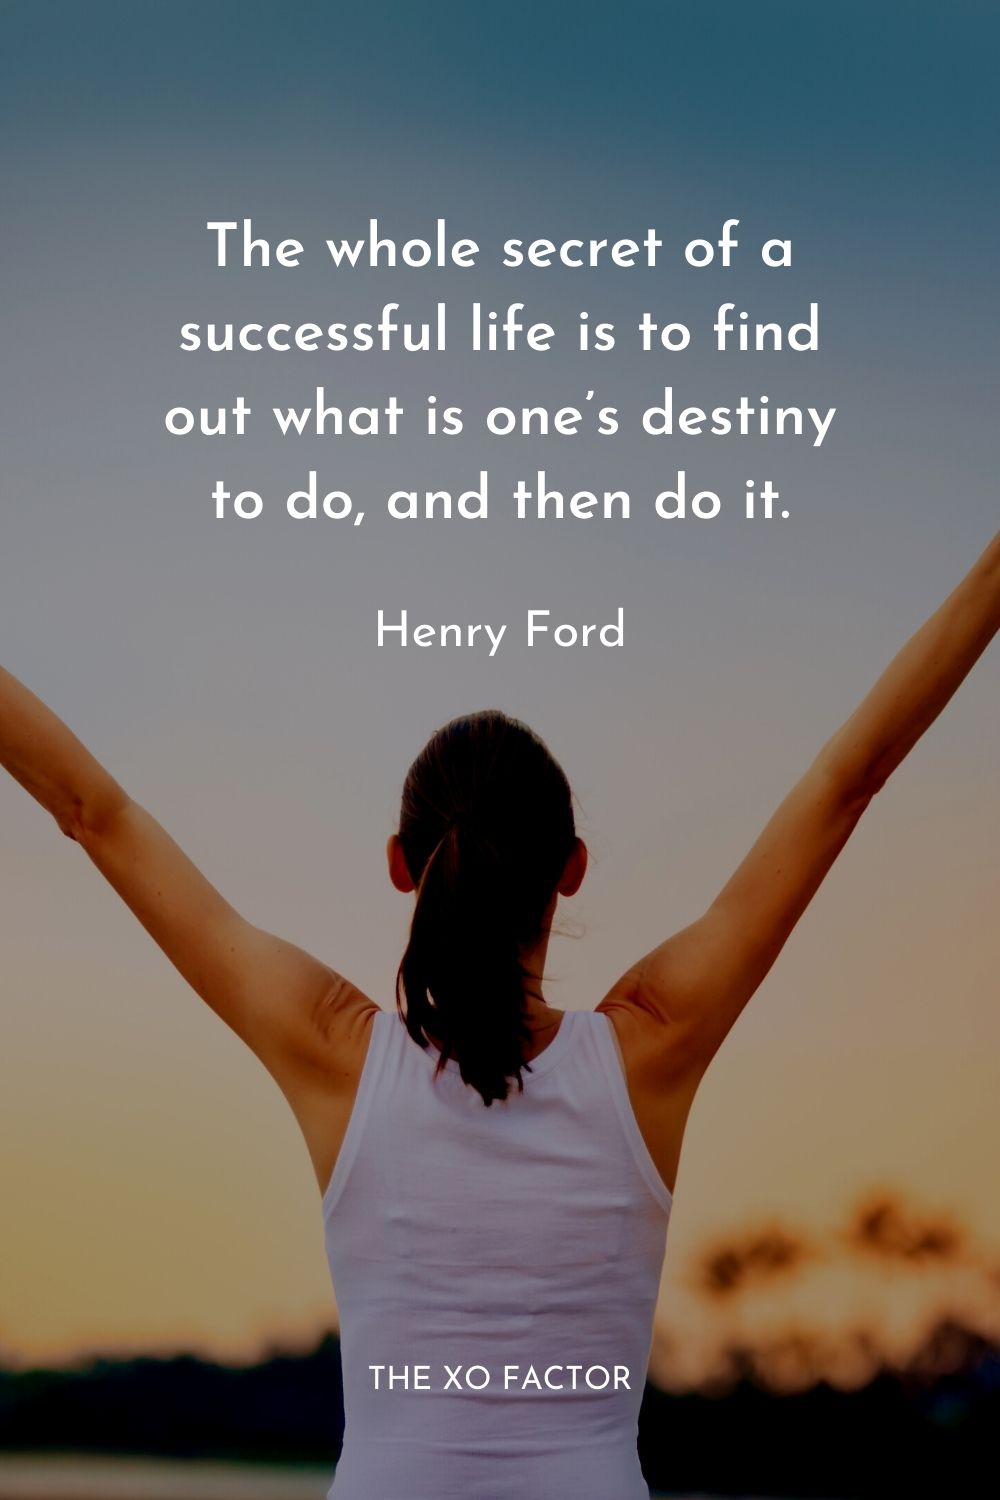 The whole secret of a successful life is to find out what is one’s destiny to do, and then do it.